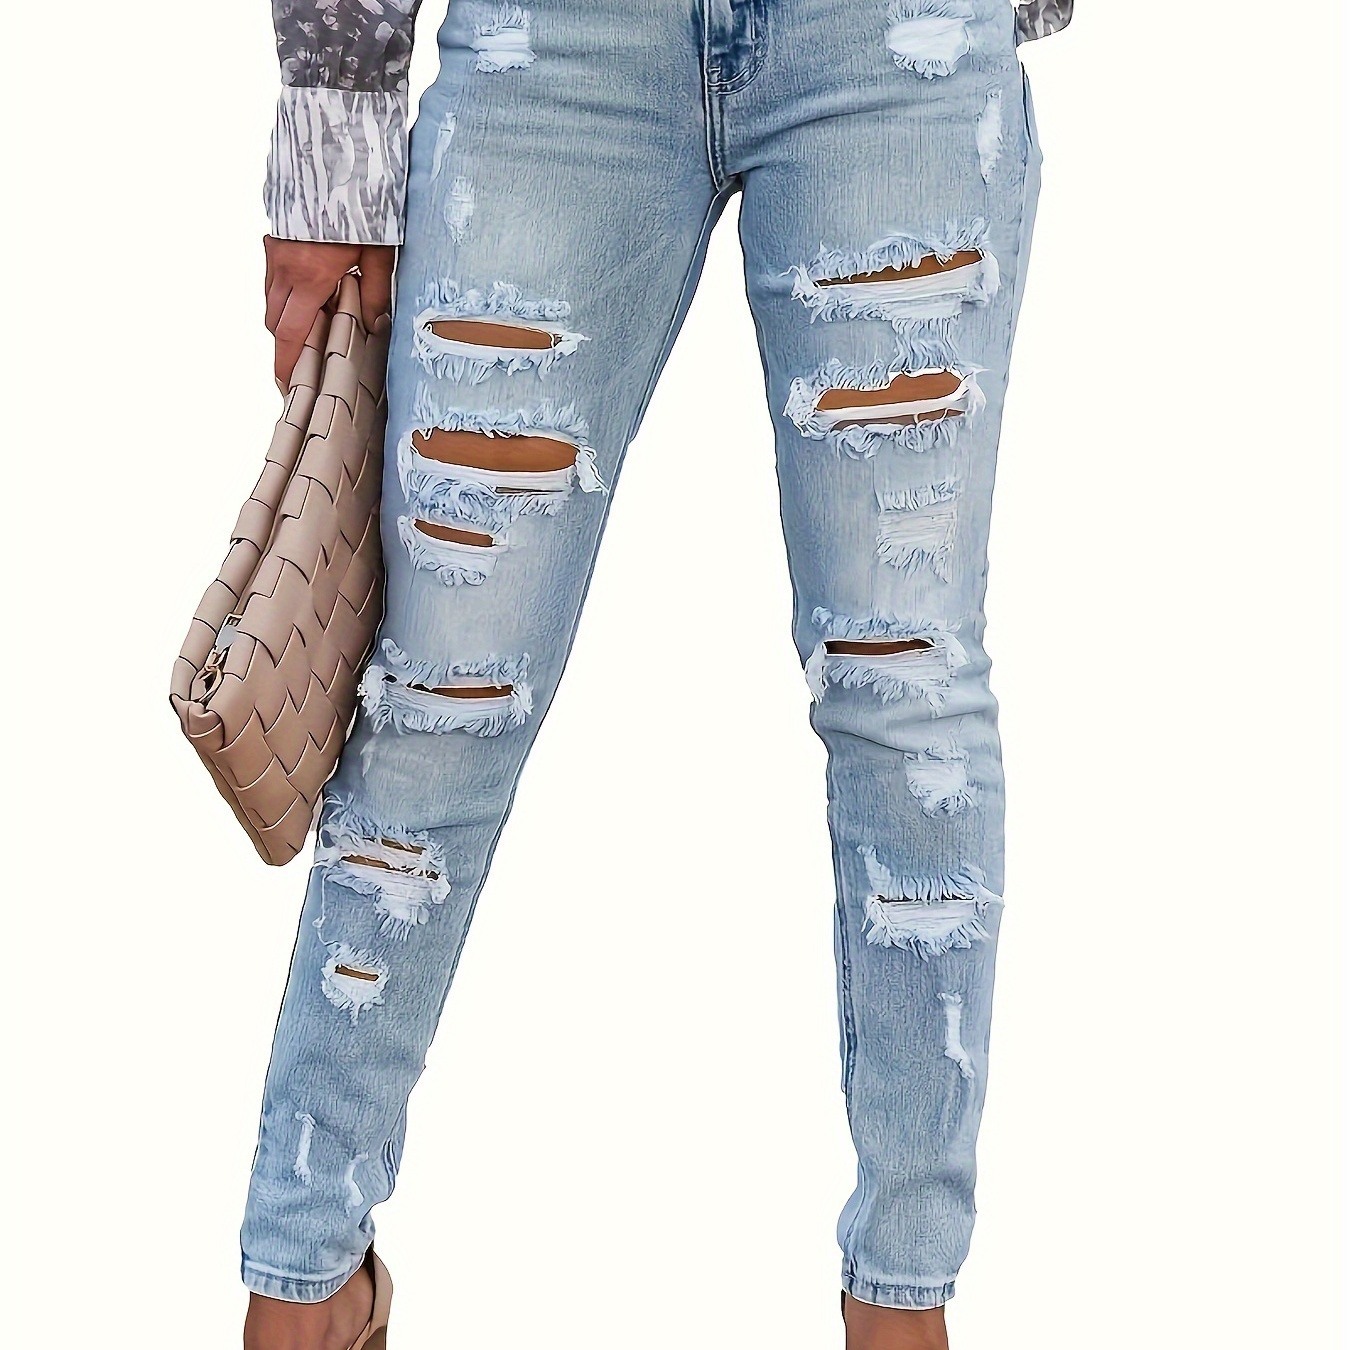 

Ripped Holes Washed Skinny Jeans, Slant Pockets Stretchy Denim Trousers, Women's Denim Jeans & Clothing